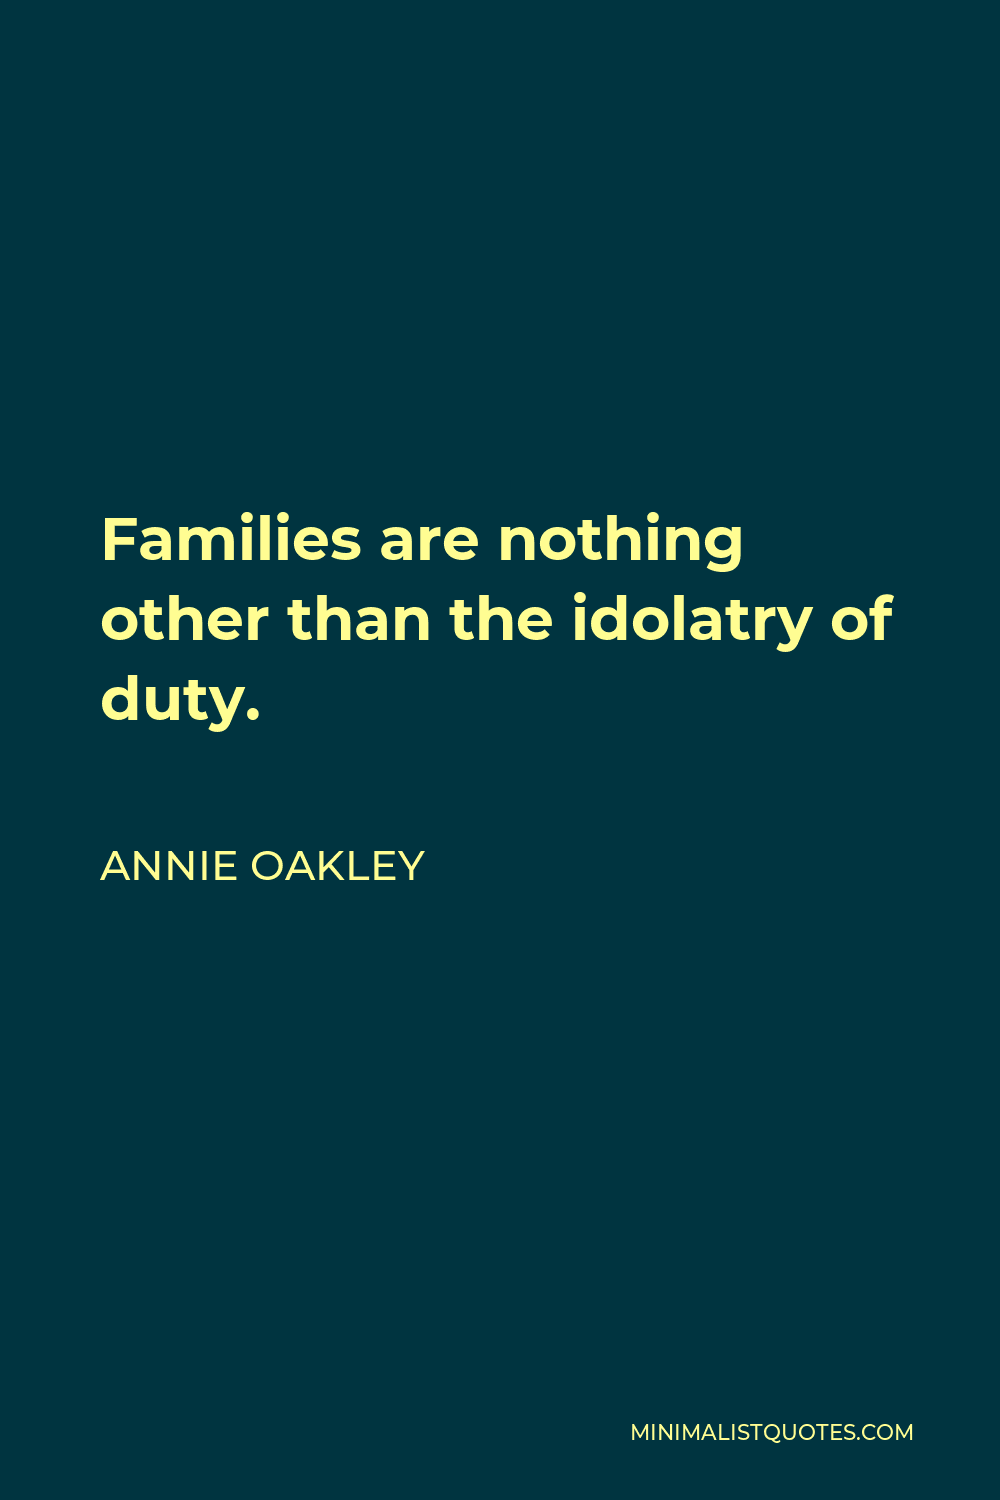 Annie Oakley Quote - Families are nothing other than the idolatry of duty.